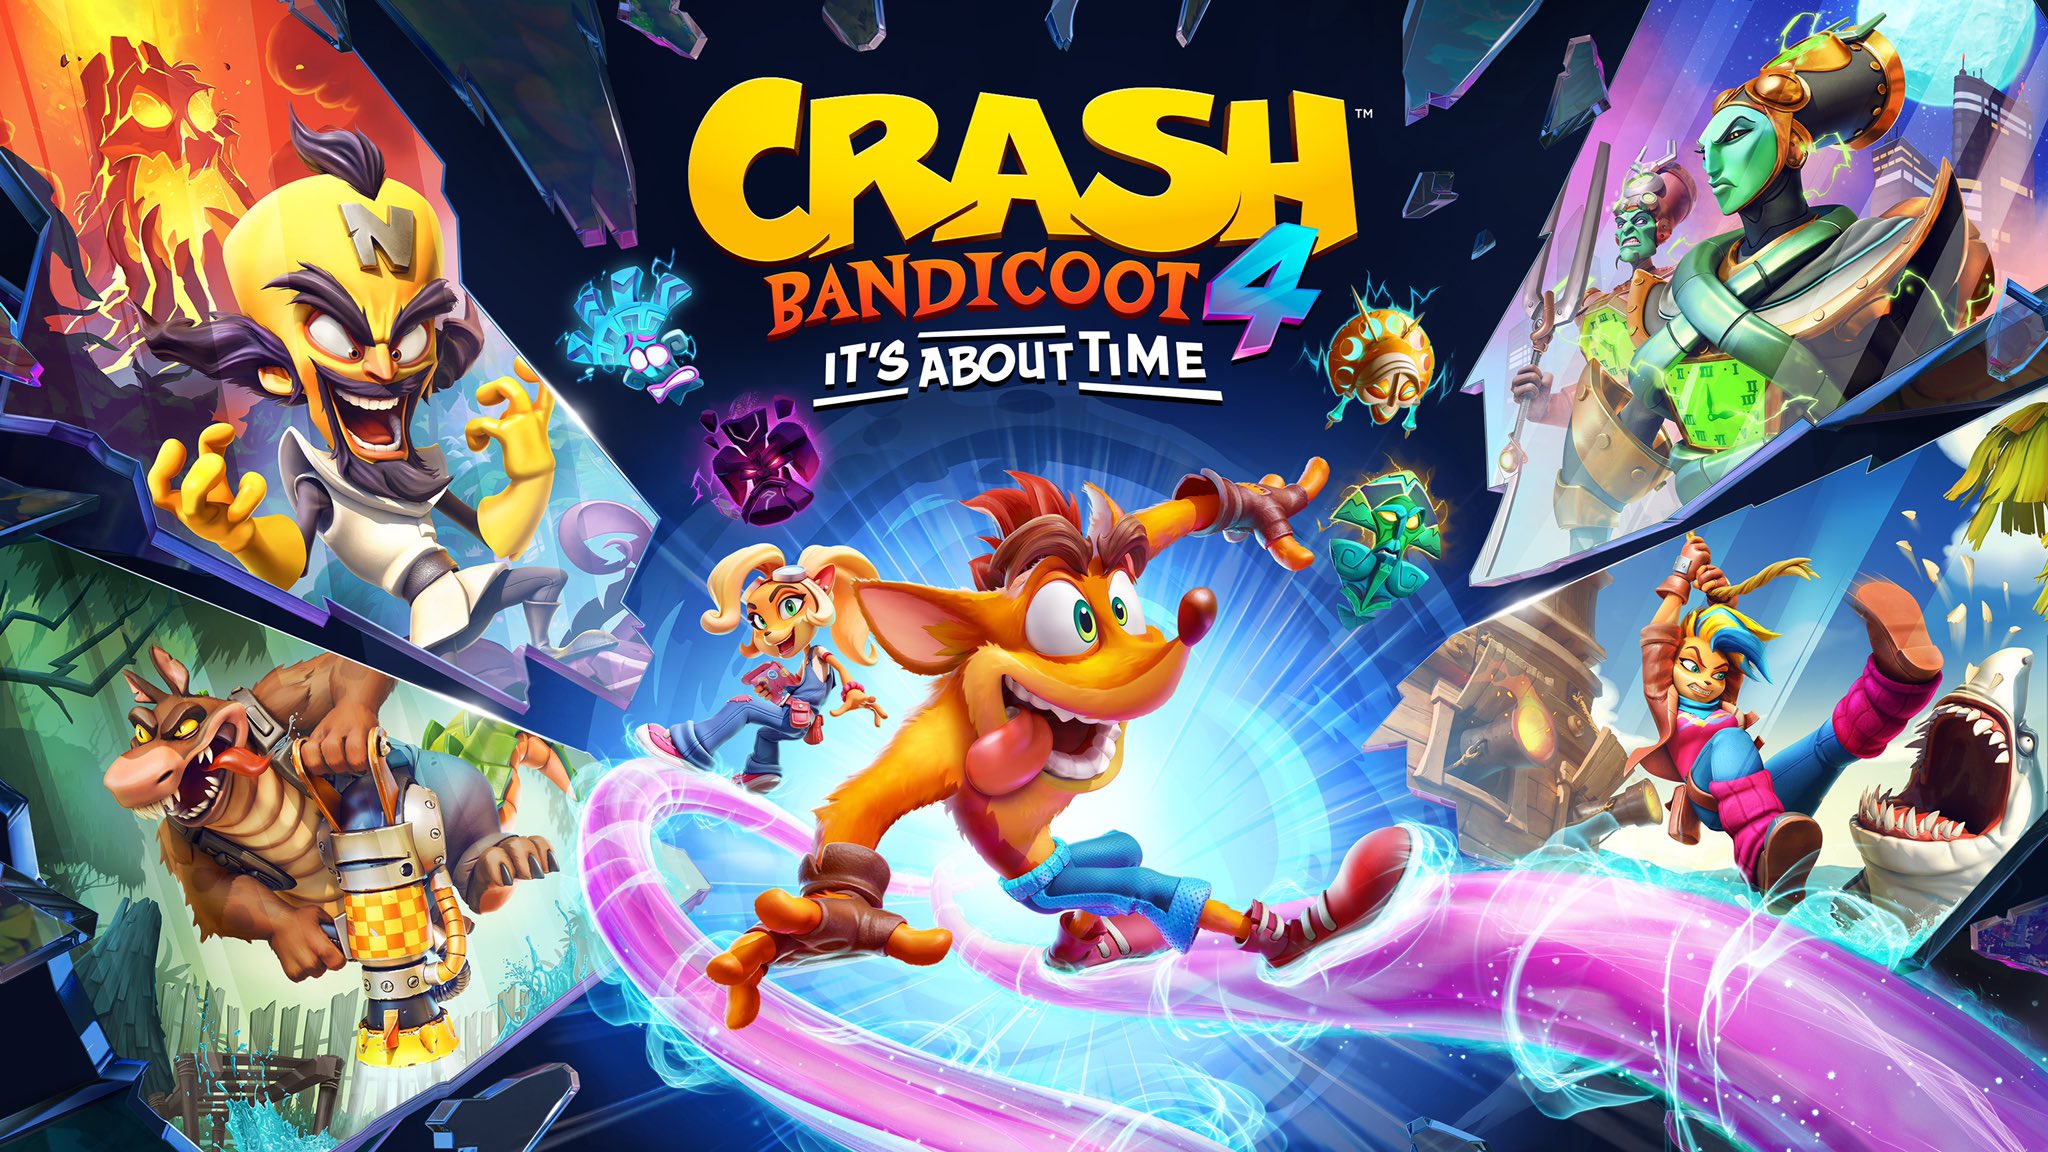 Video Game Crash Bandicoot 4: It's About Time HD Wallpaper